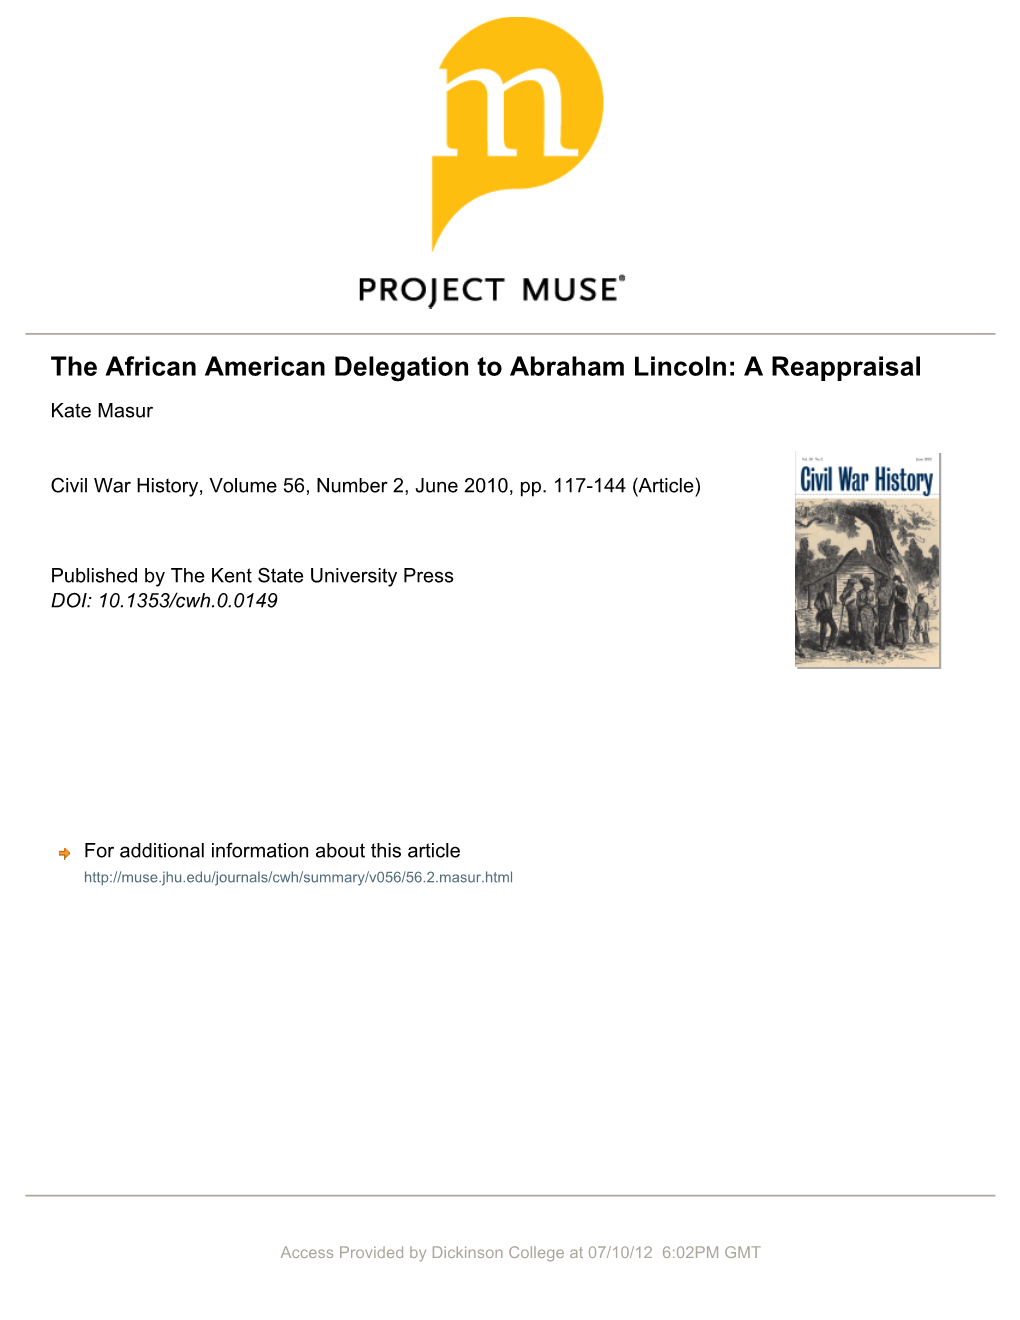 The African American Delegation to Abraham Lincoln: a Reappraisal